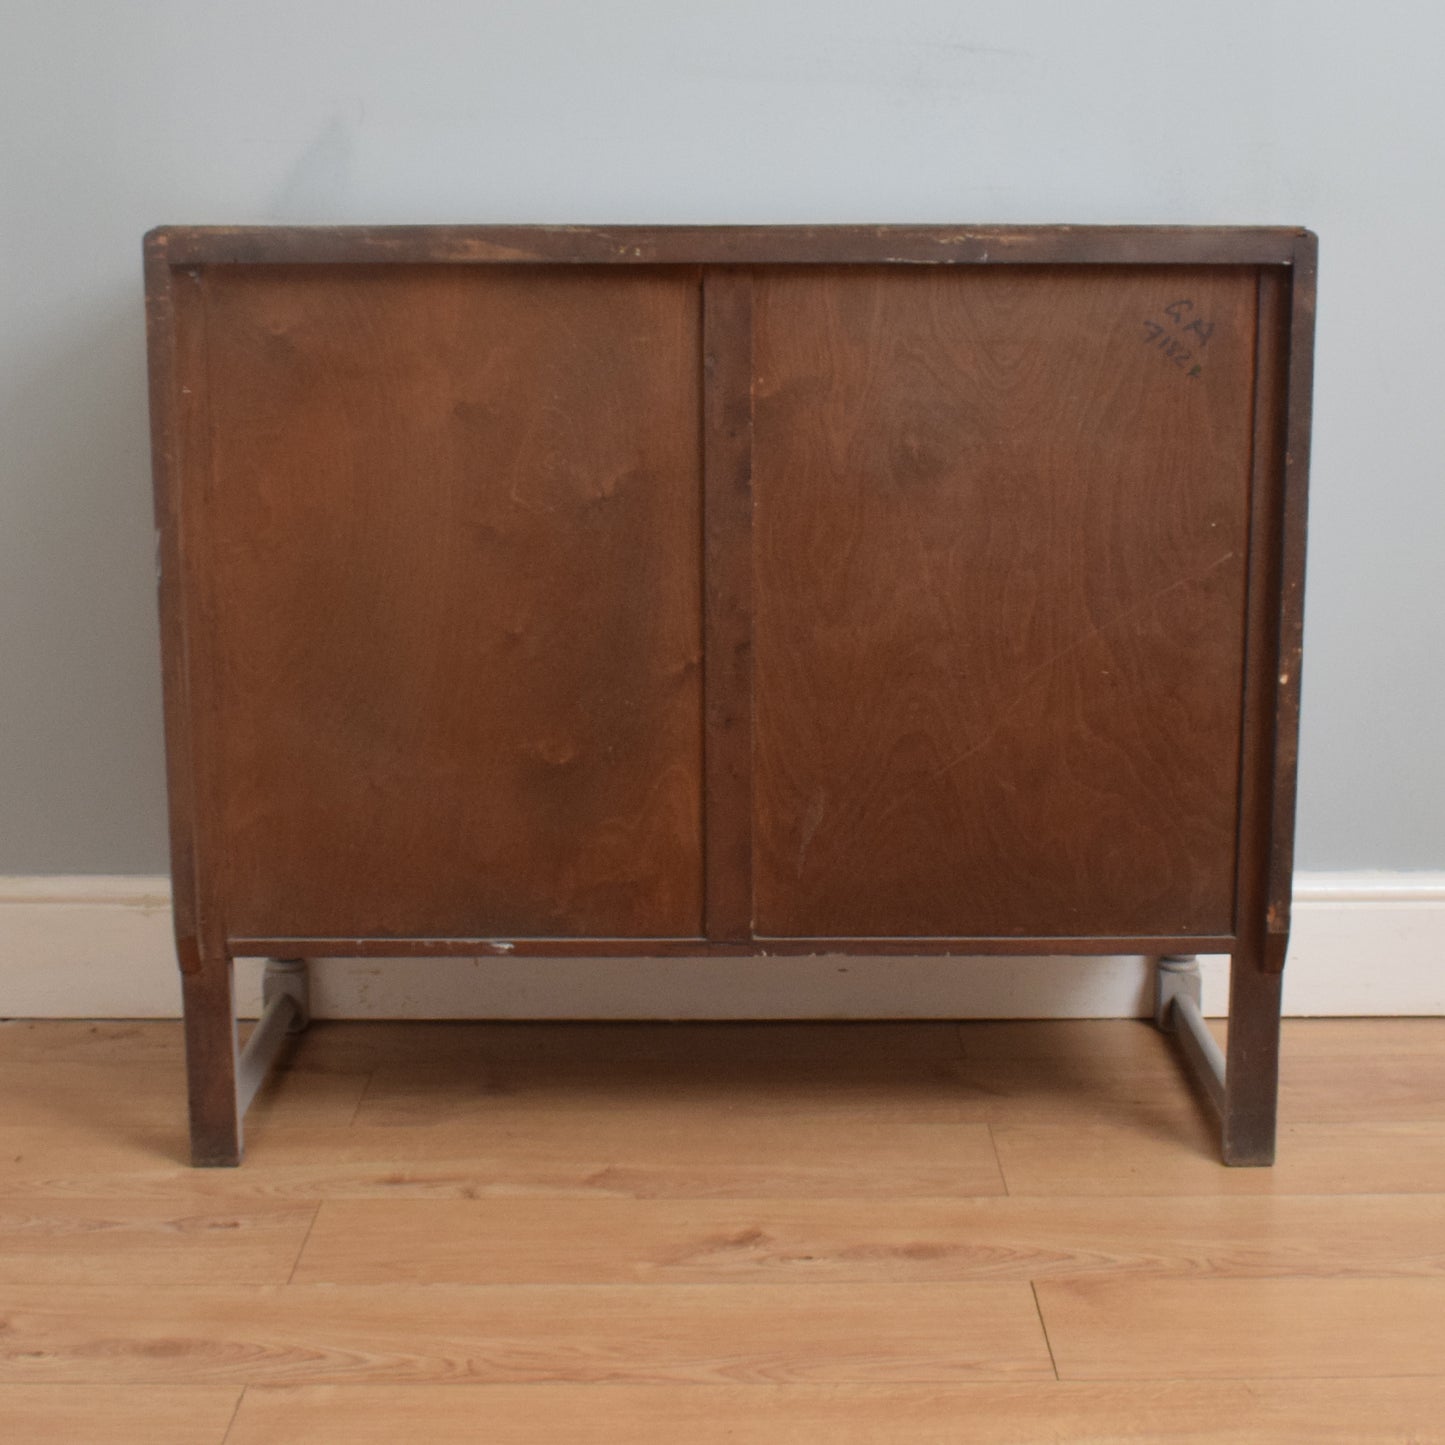 Painted 'Shabby Chic' Sideboard